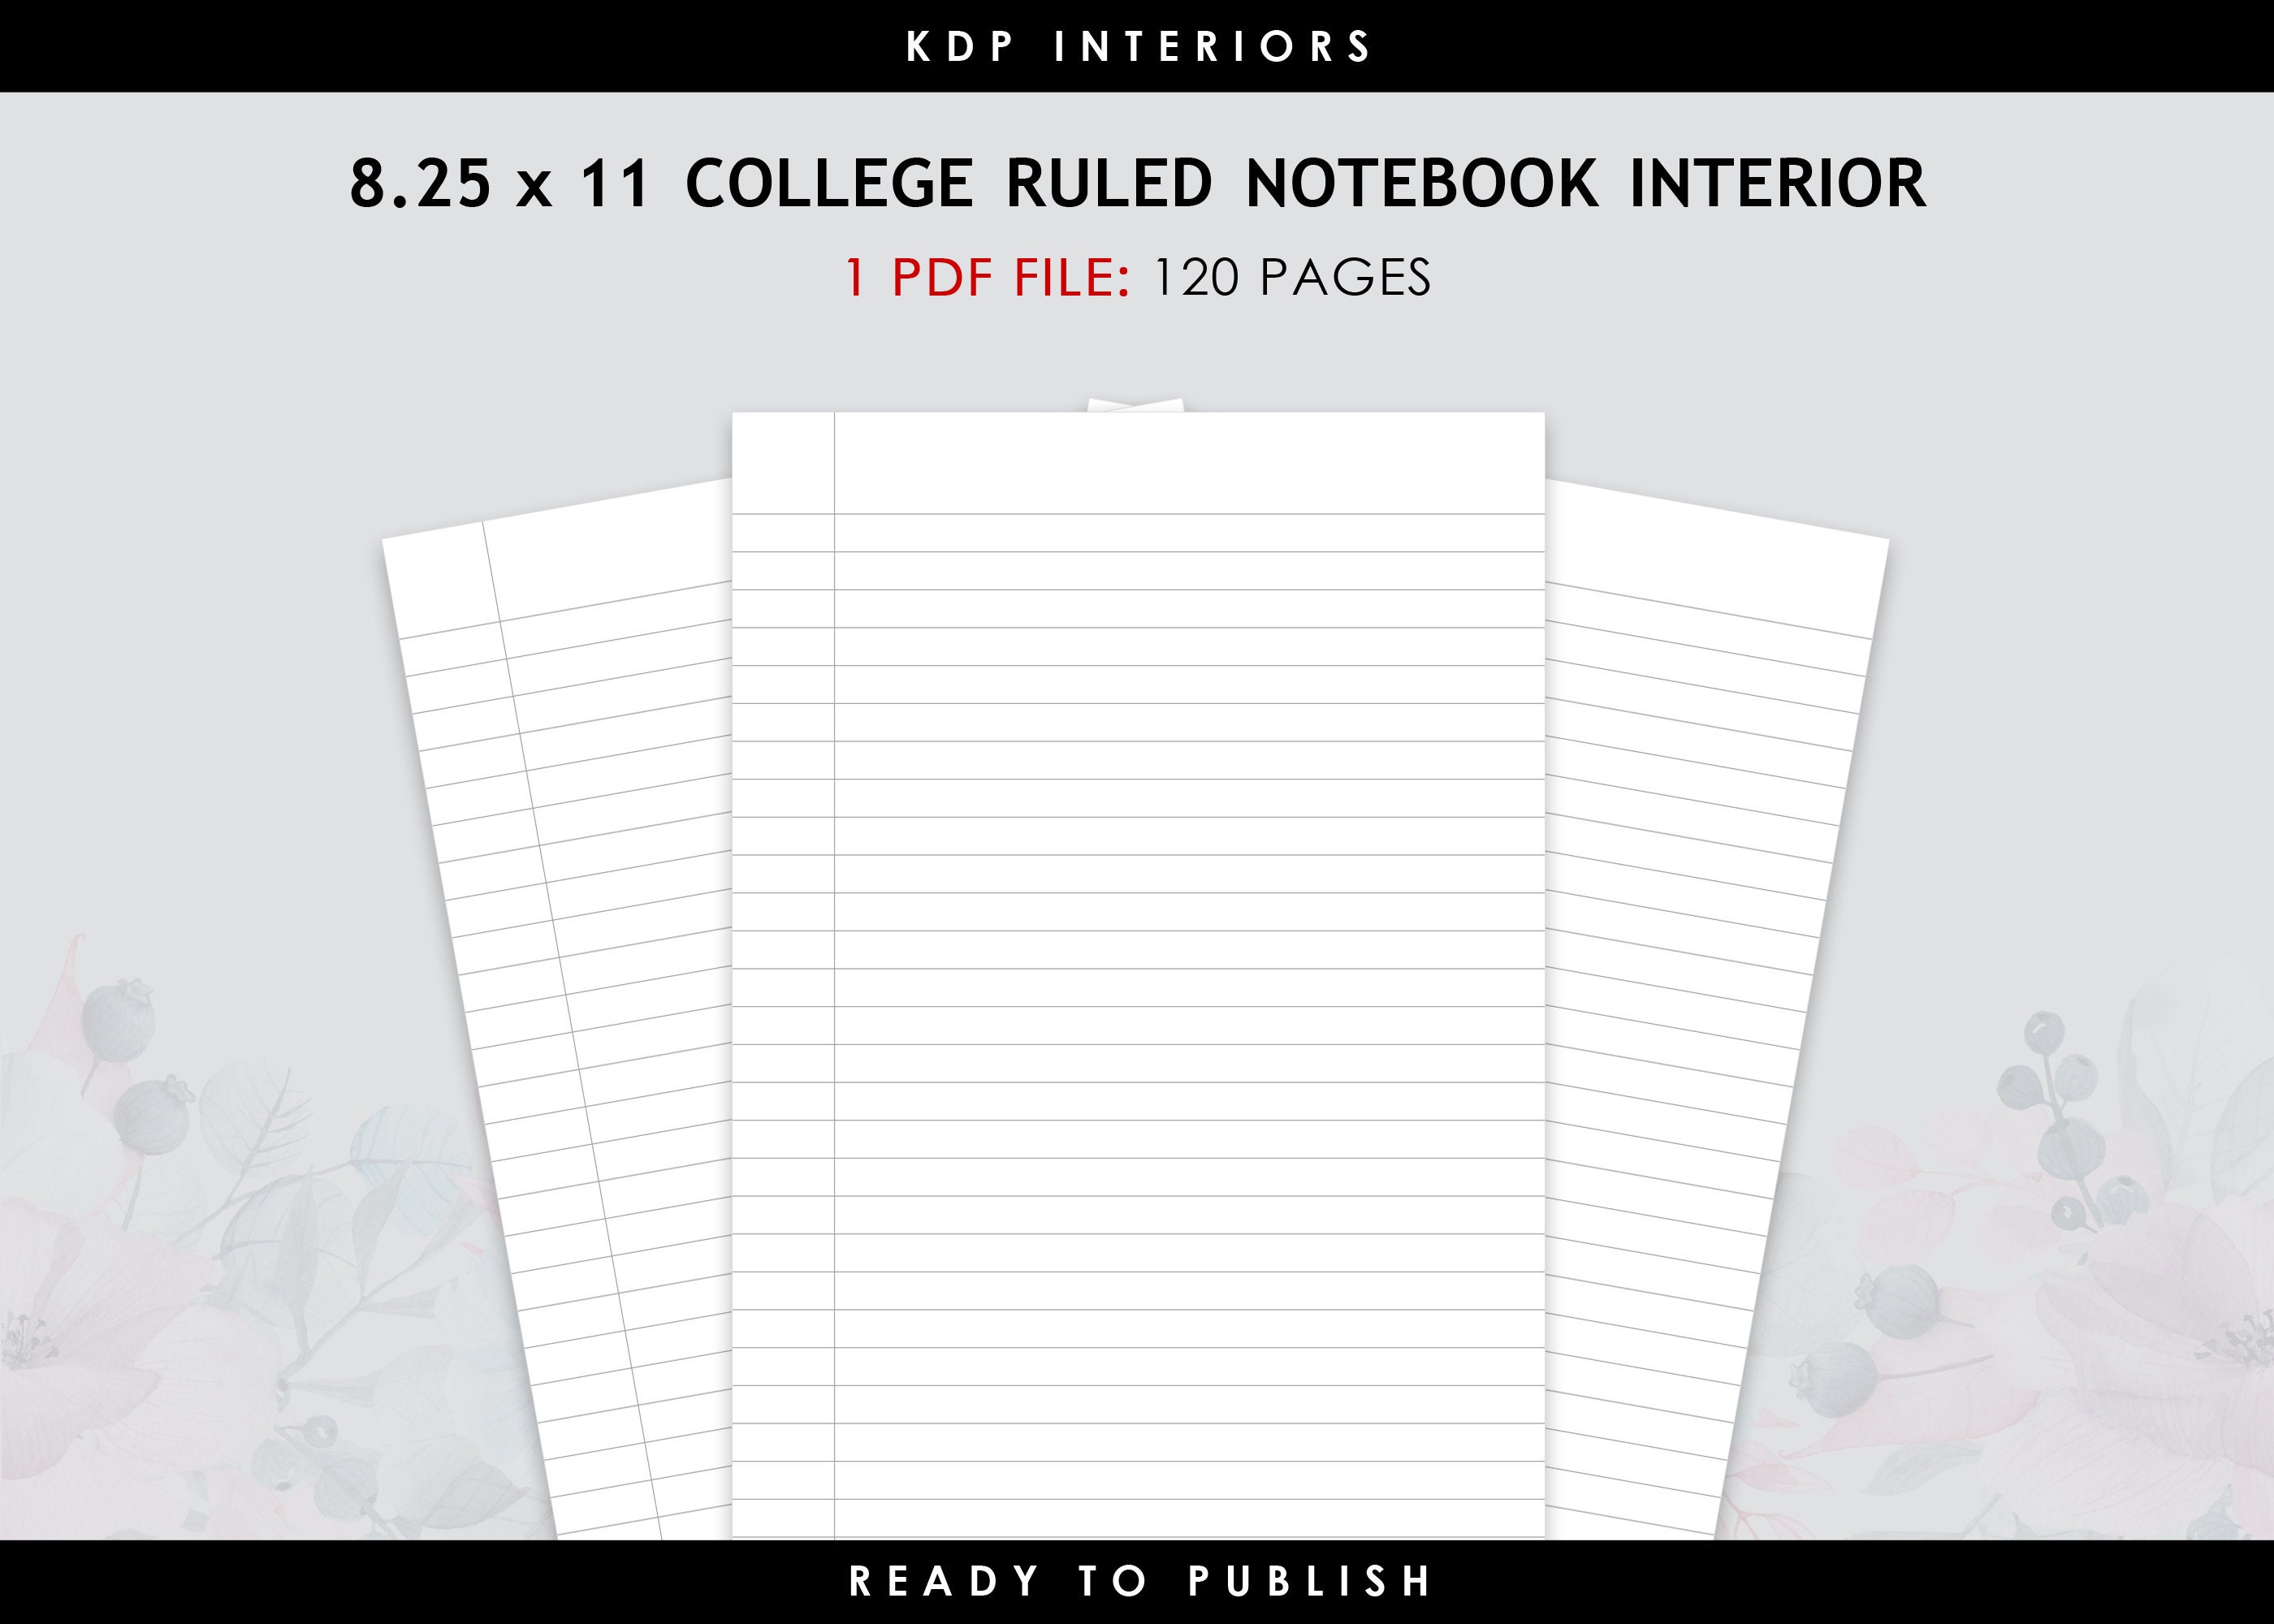 Notebook: Sparkle White Glitter Composition Book 7.5 x 9.25 100 College  Ruled Pages